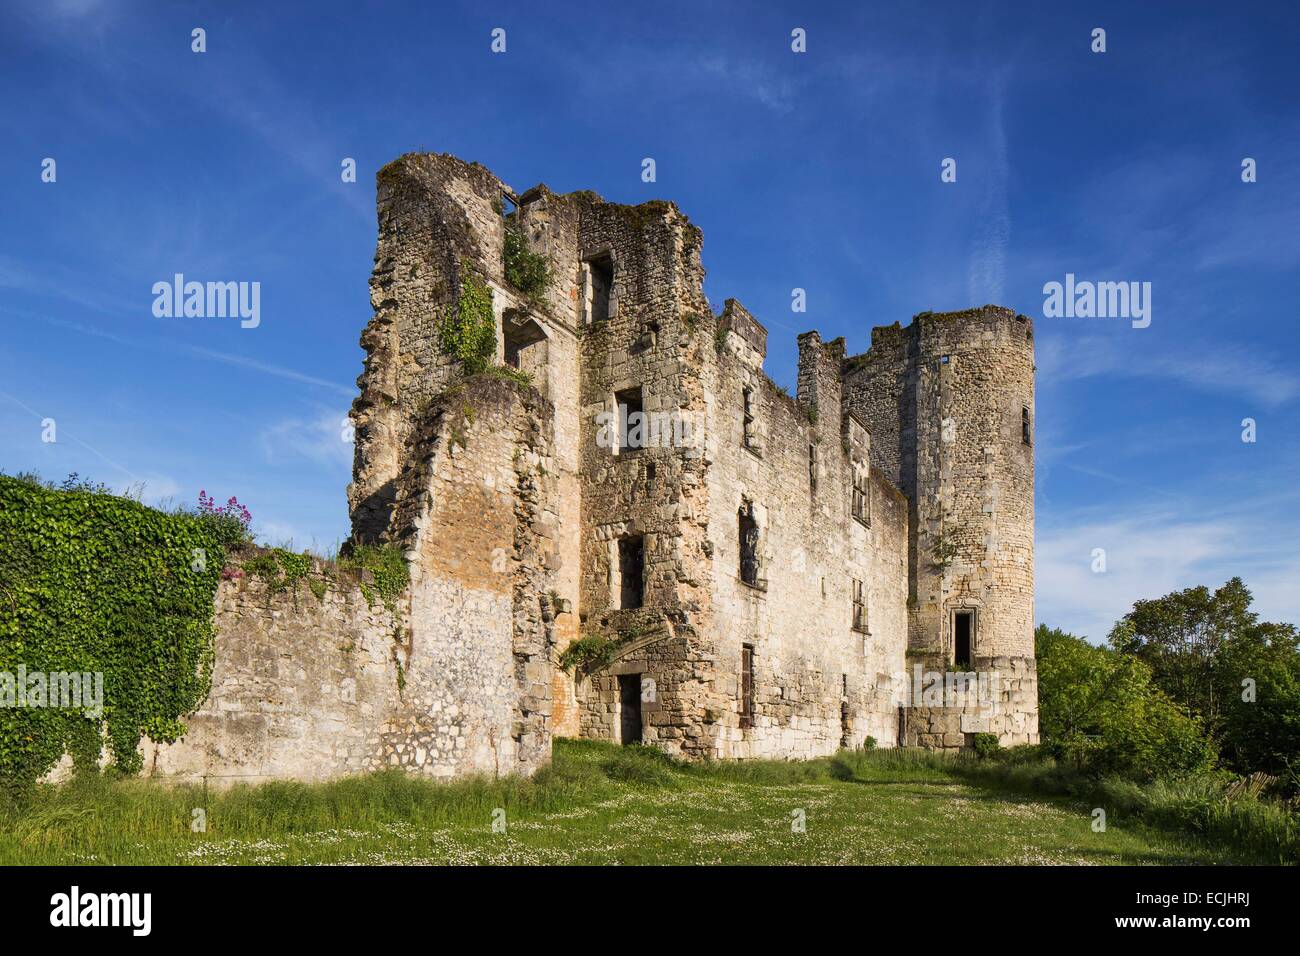 France, Dordogne, Perigord Blanc, ruins of Barriere Castle dated 13th century Stock Photo